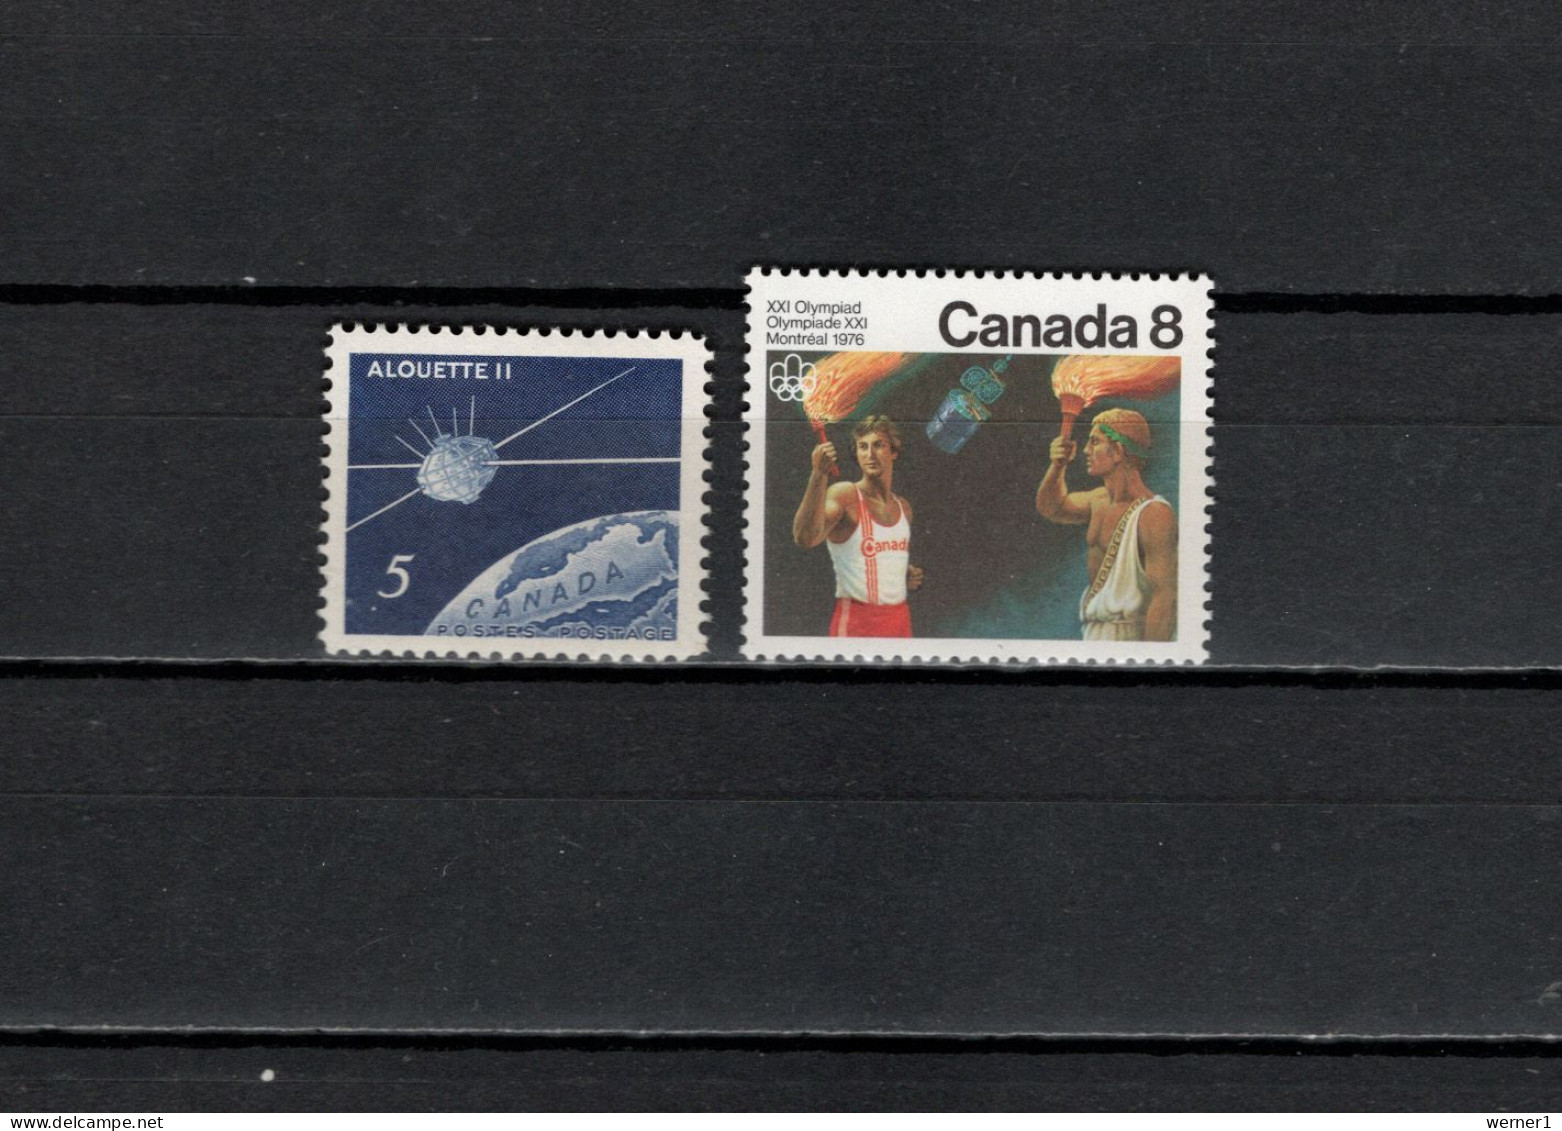 Canada 1966/1976 Space, Alouette II Satellite, Olympic Games Montreal 2 Stamps MNH - Nordamerika